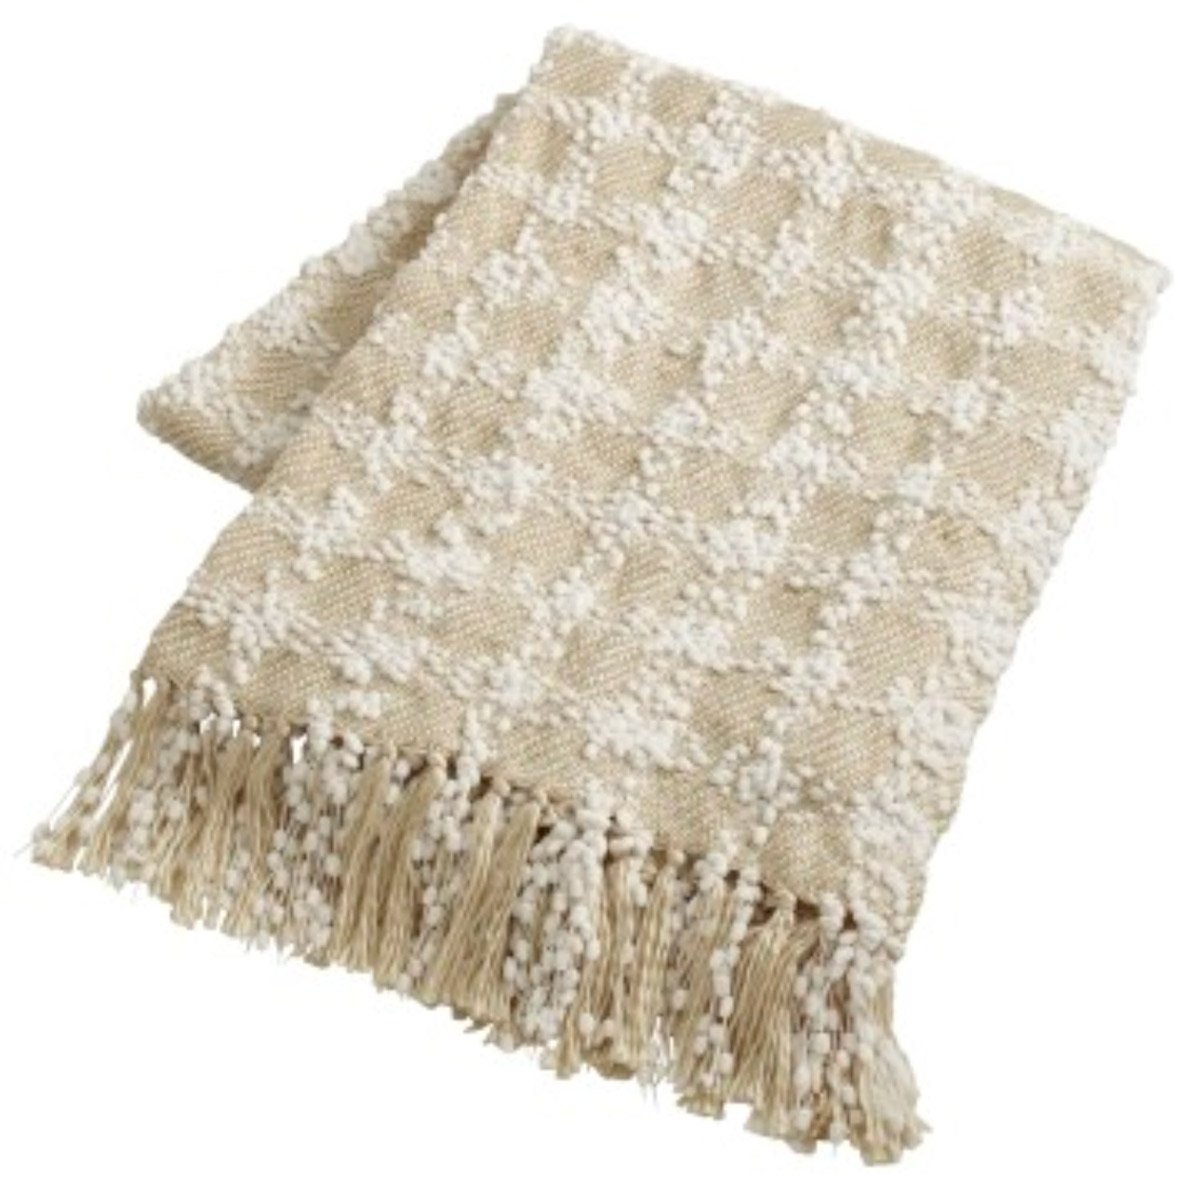 Frazada Checkers Chenille Ivory Pier 1 Imports